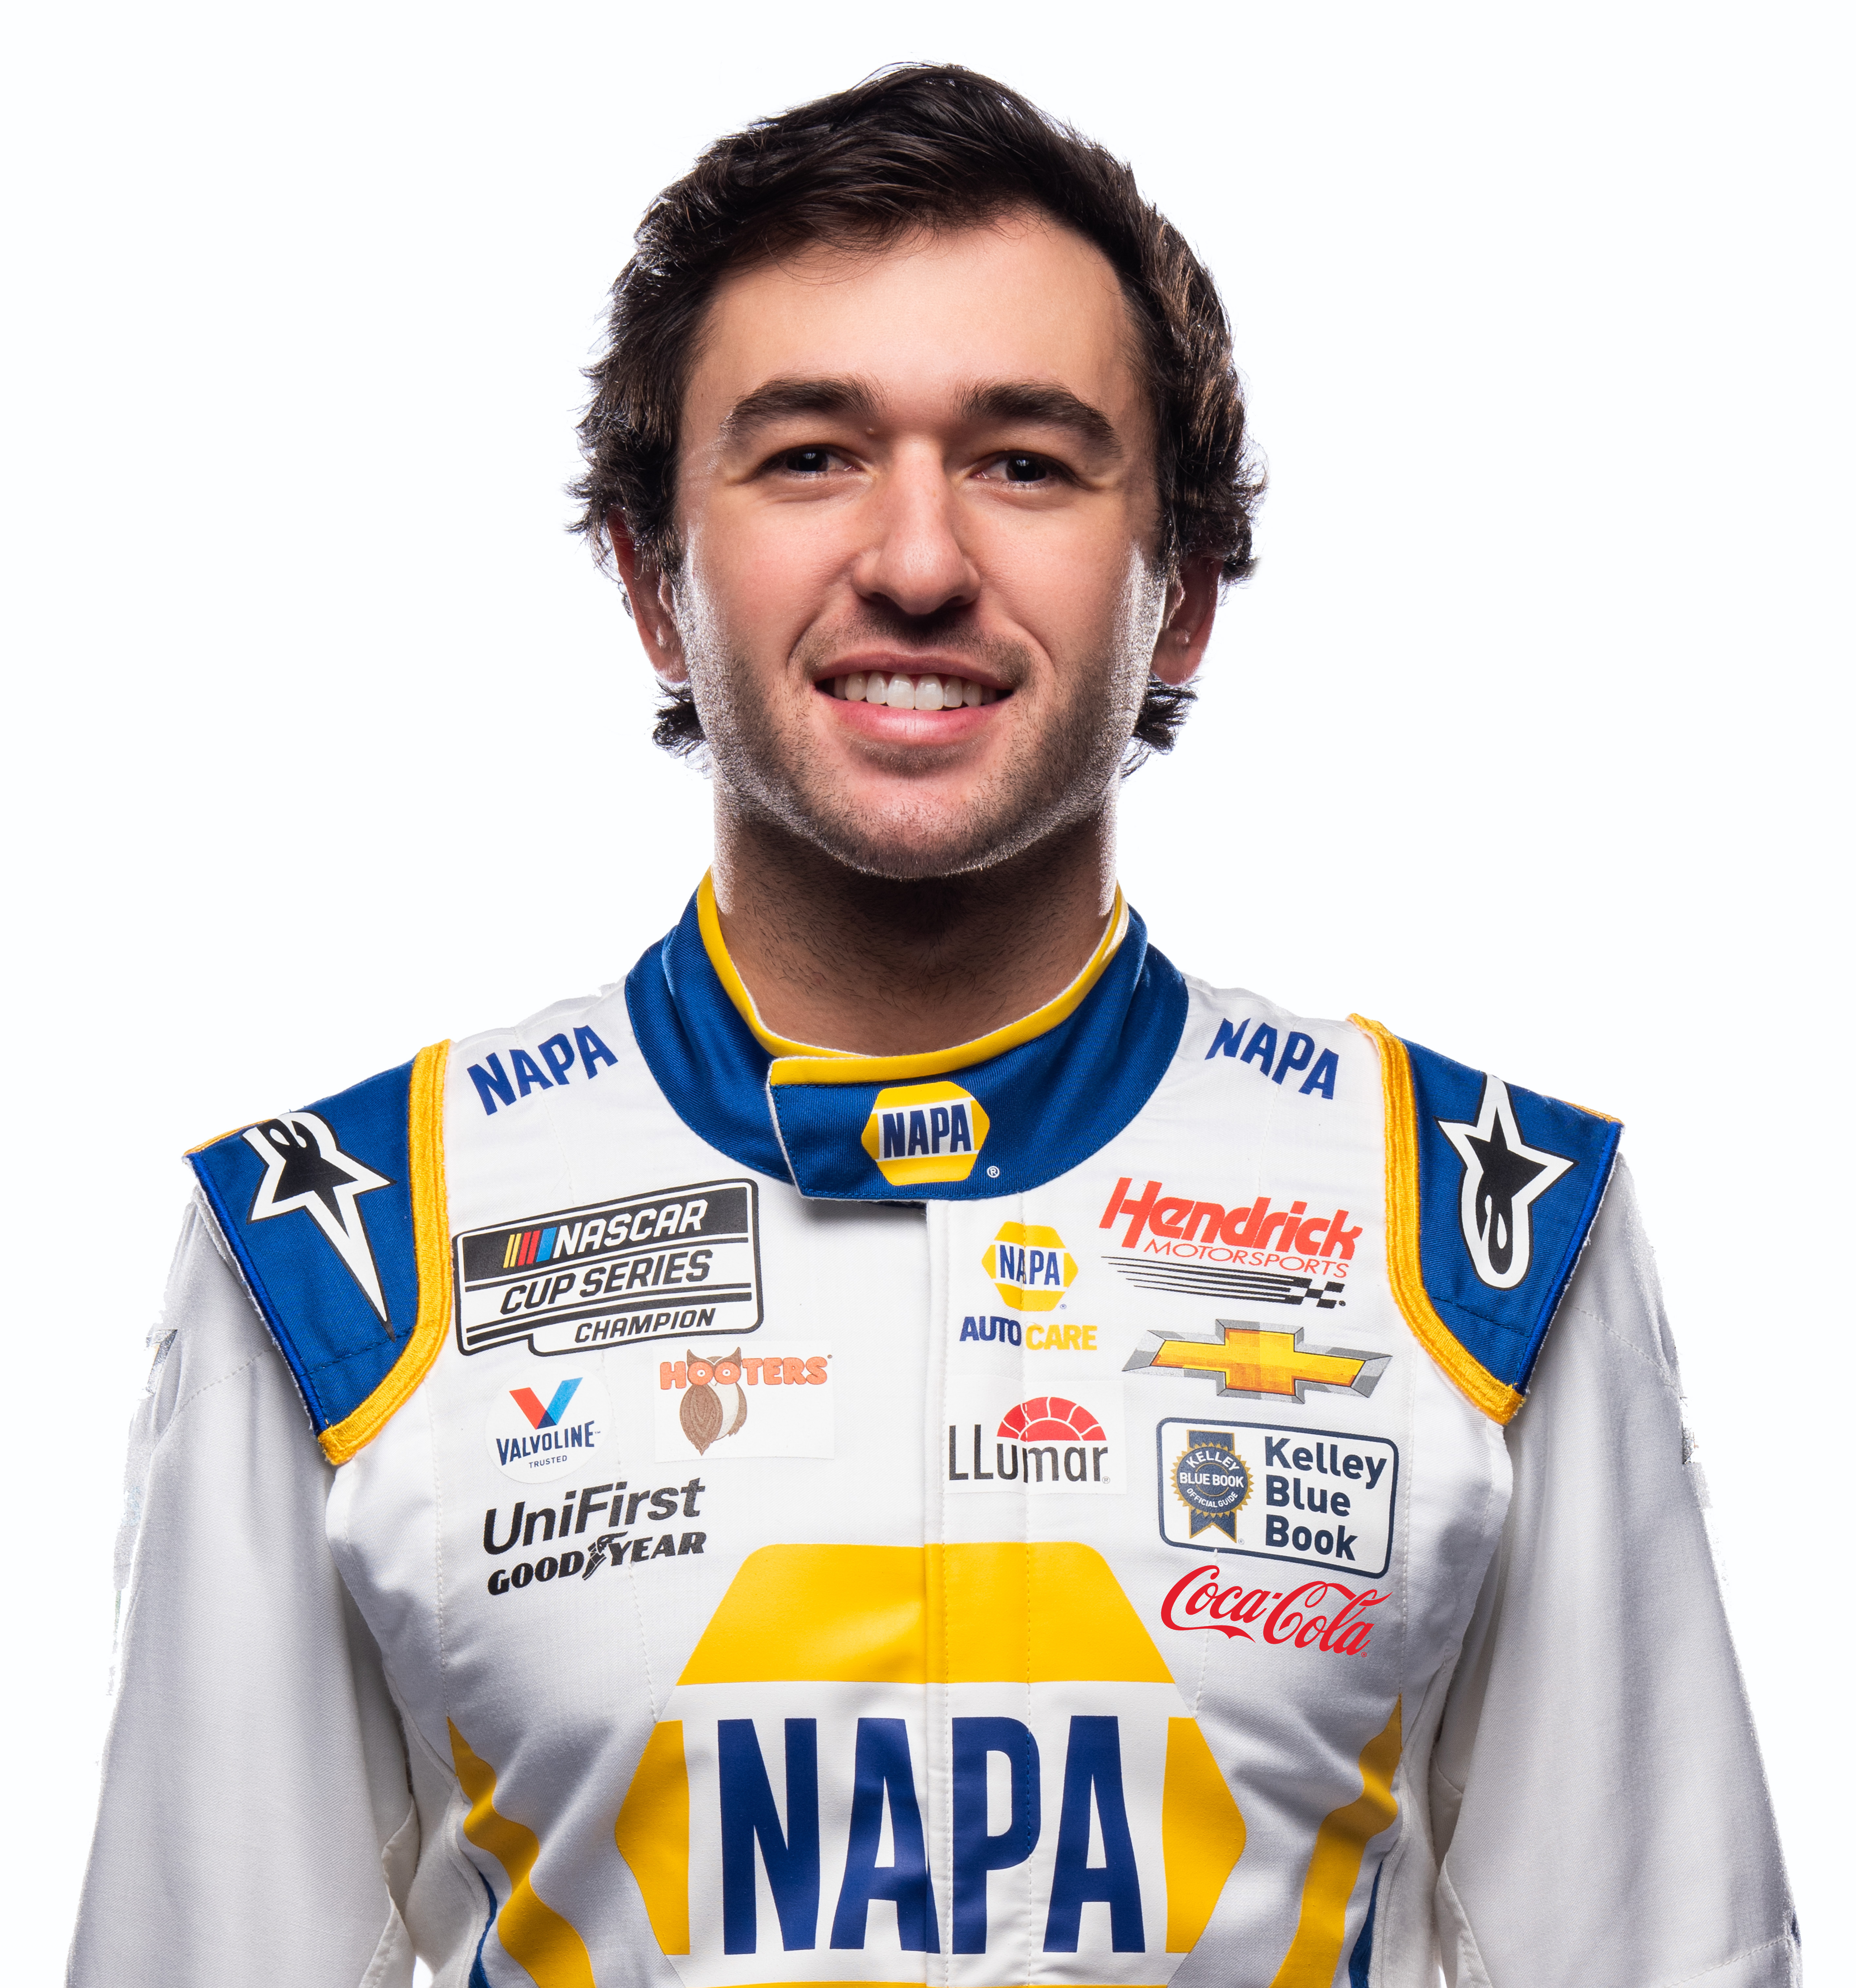 Desperate Chase Elliott is +750 to win at Indy